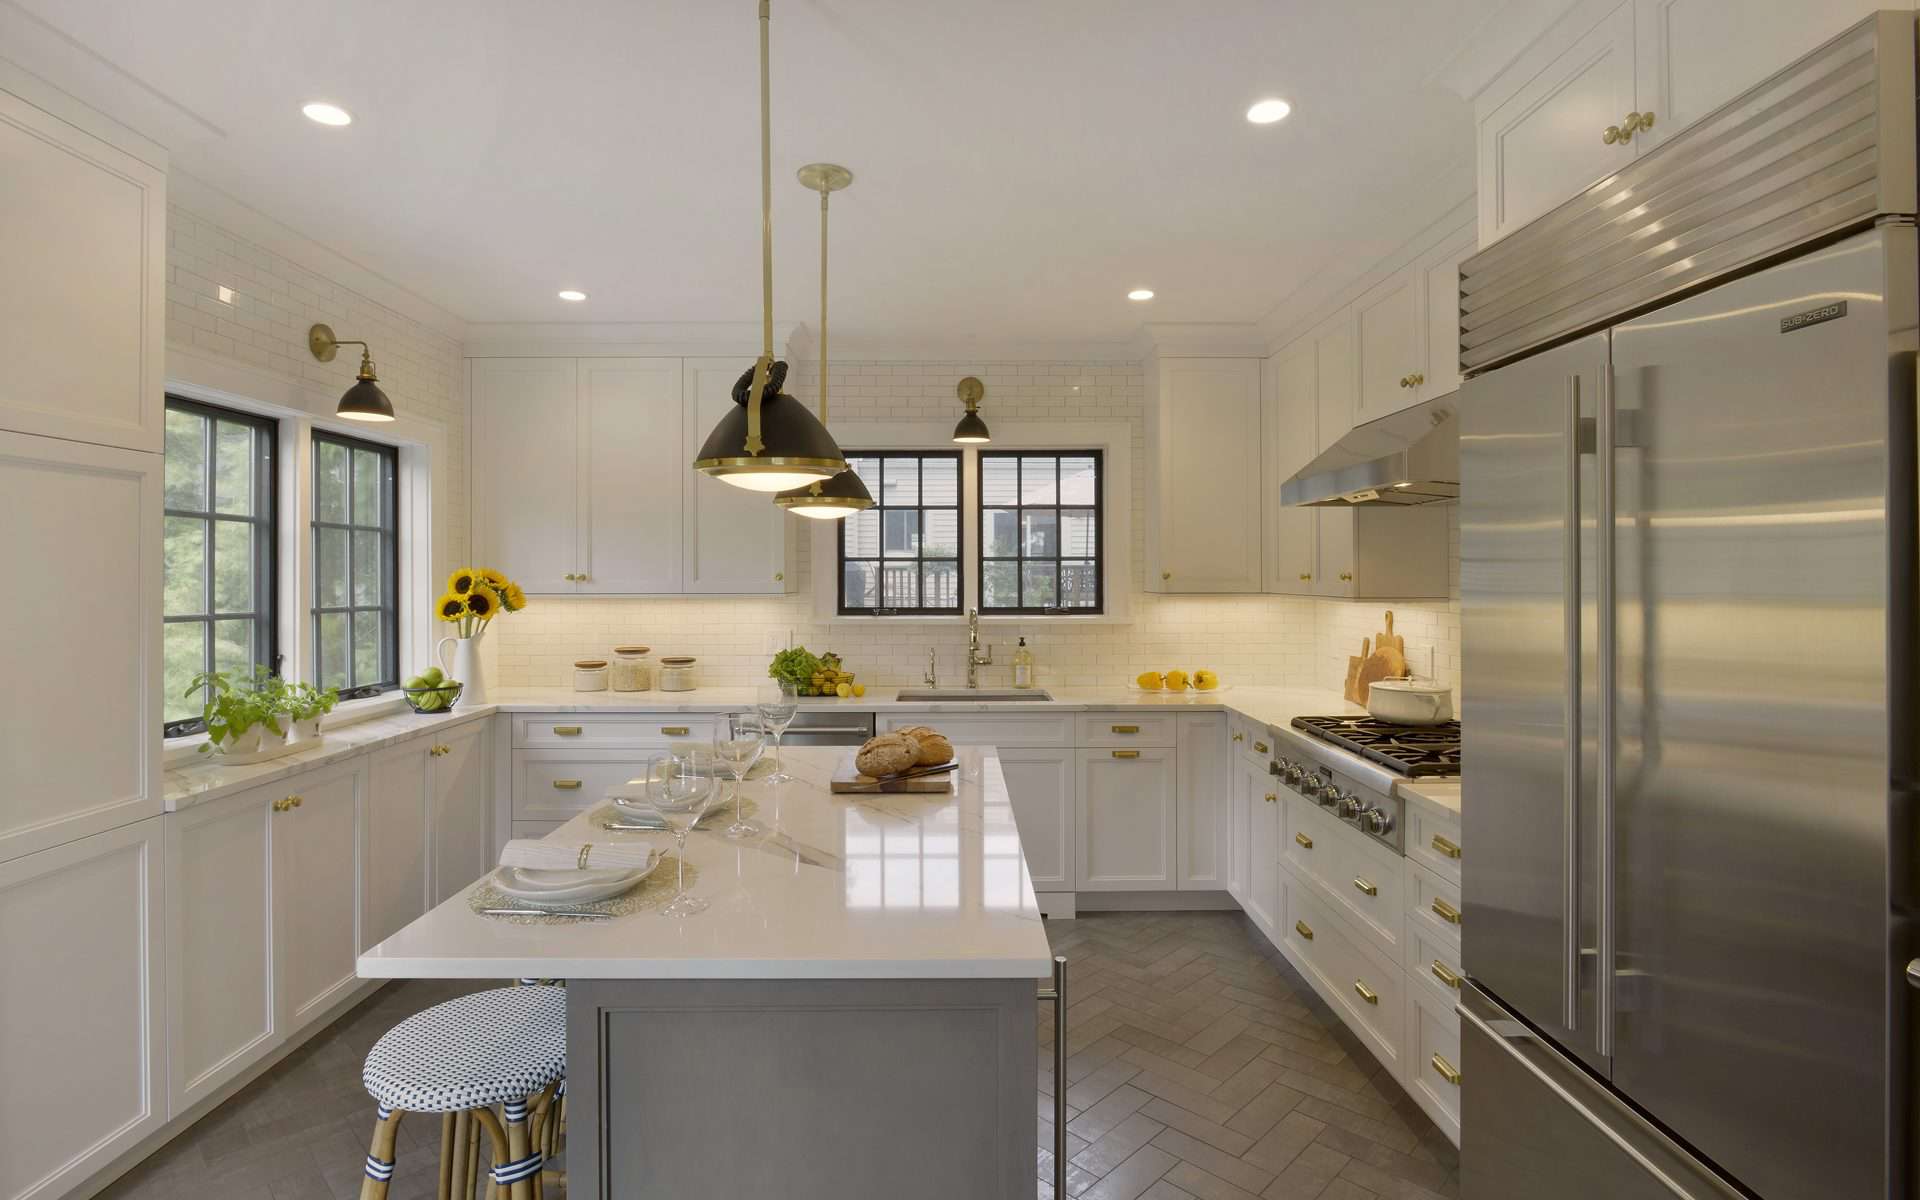 Classic kitchen features white Bilotta cabinetry, custom gray island, gold accents and modern pendant lights.